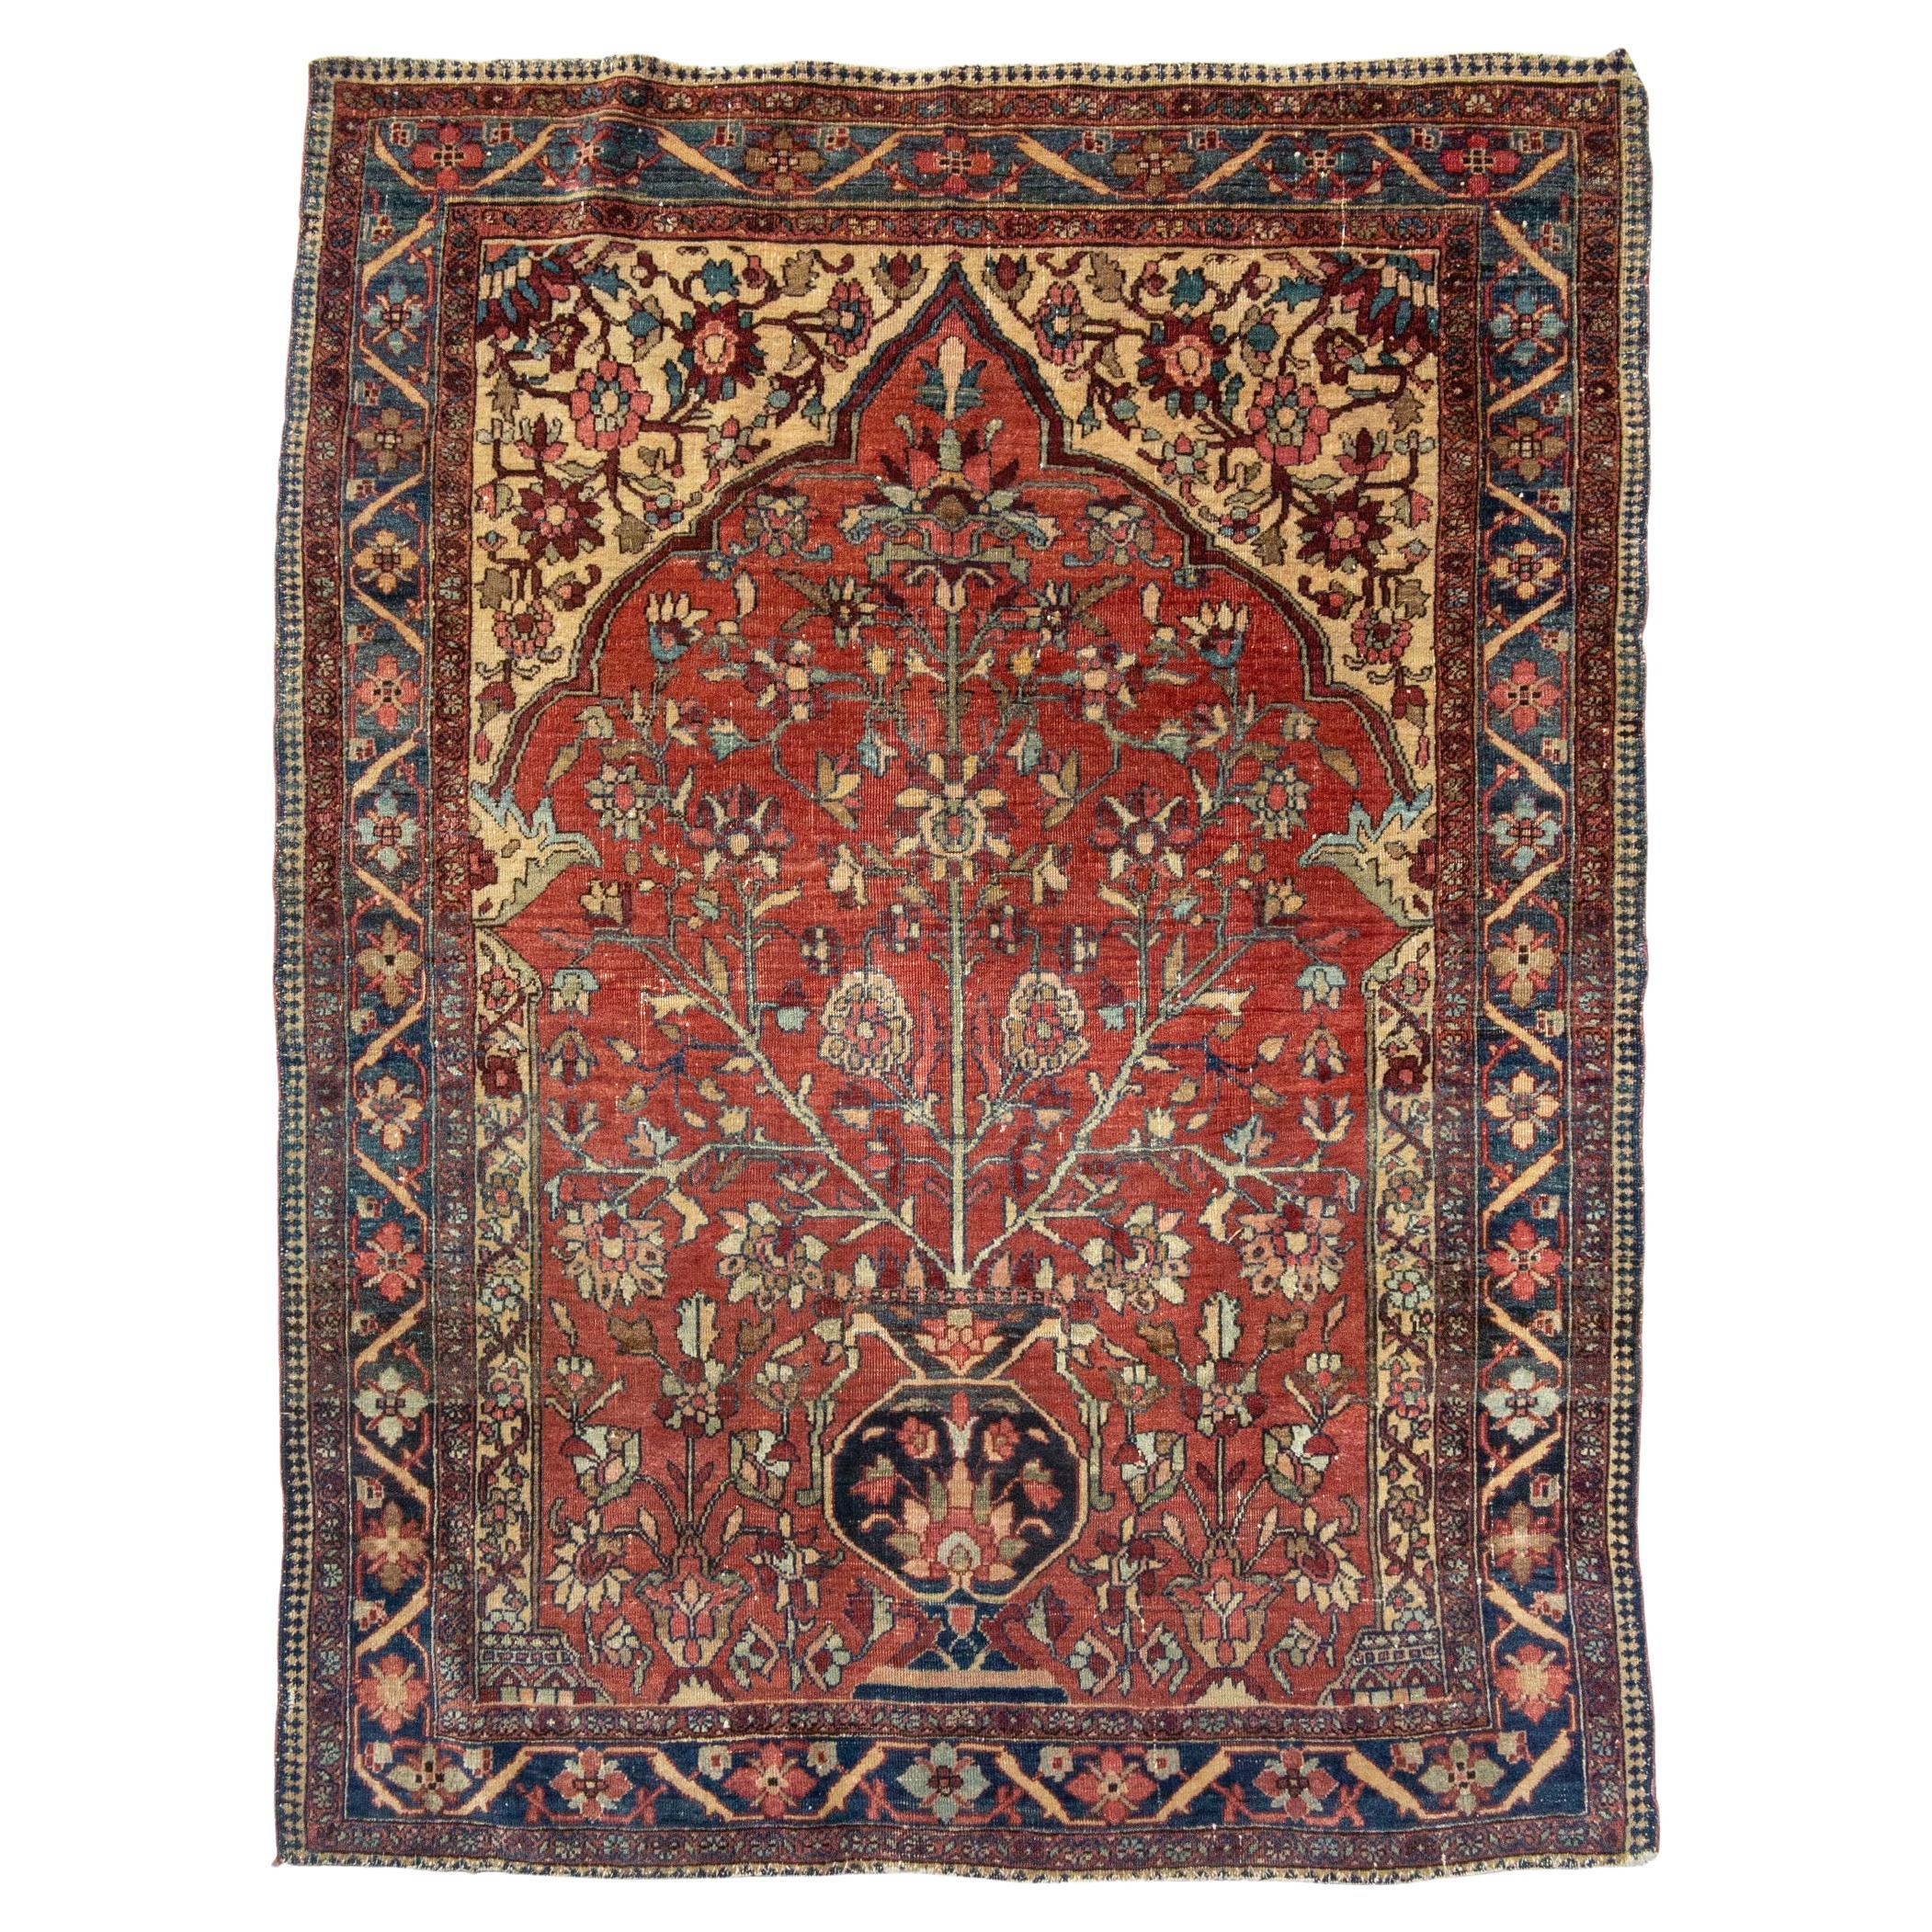 Antique Persian Fereghan Sarouk Rug, Late 19th Century For Sale